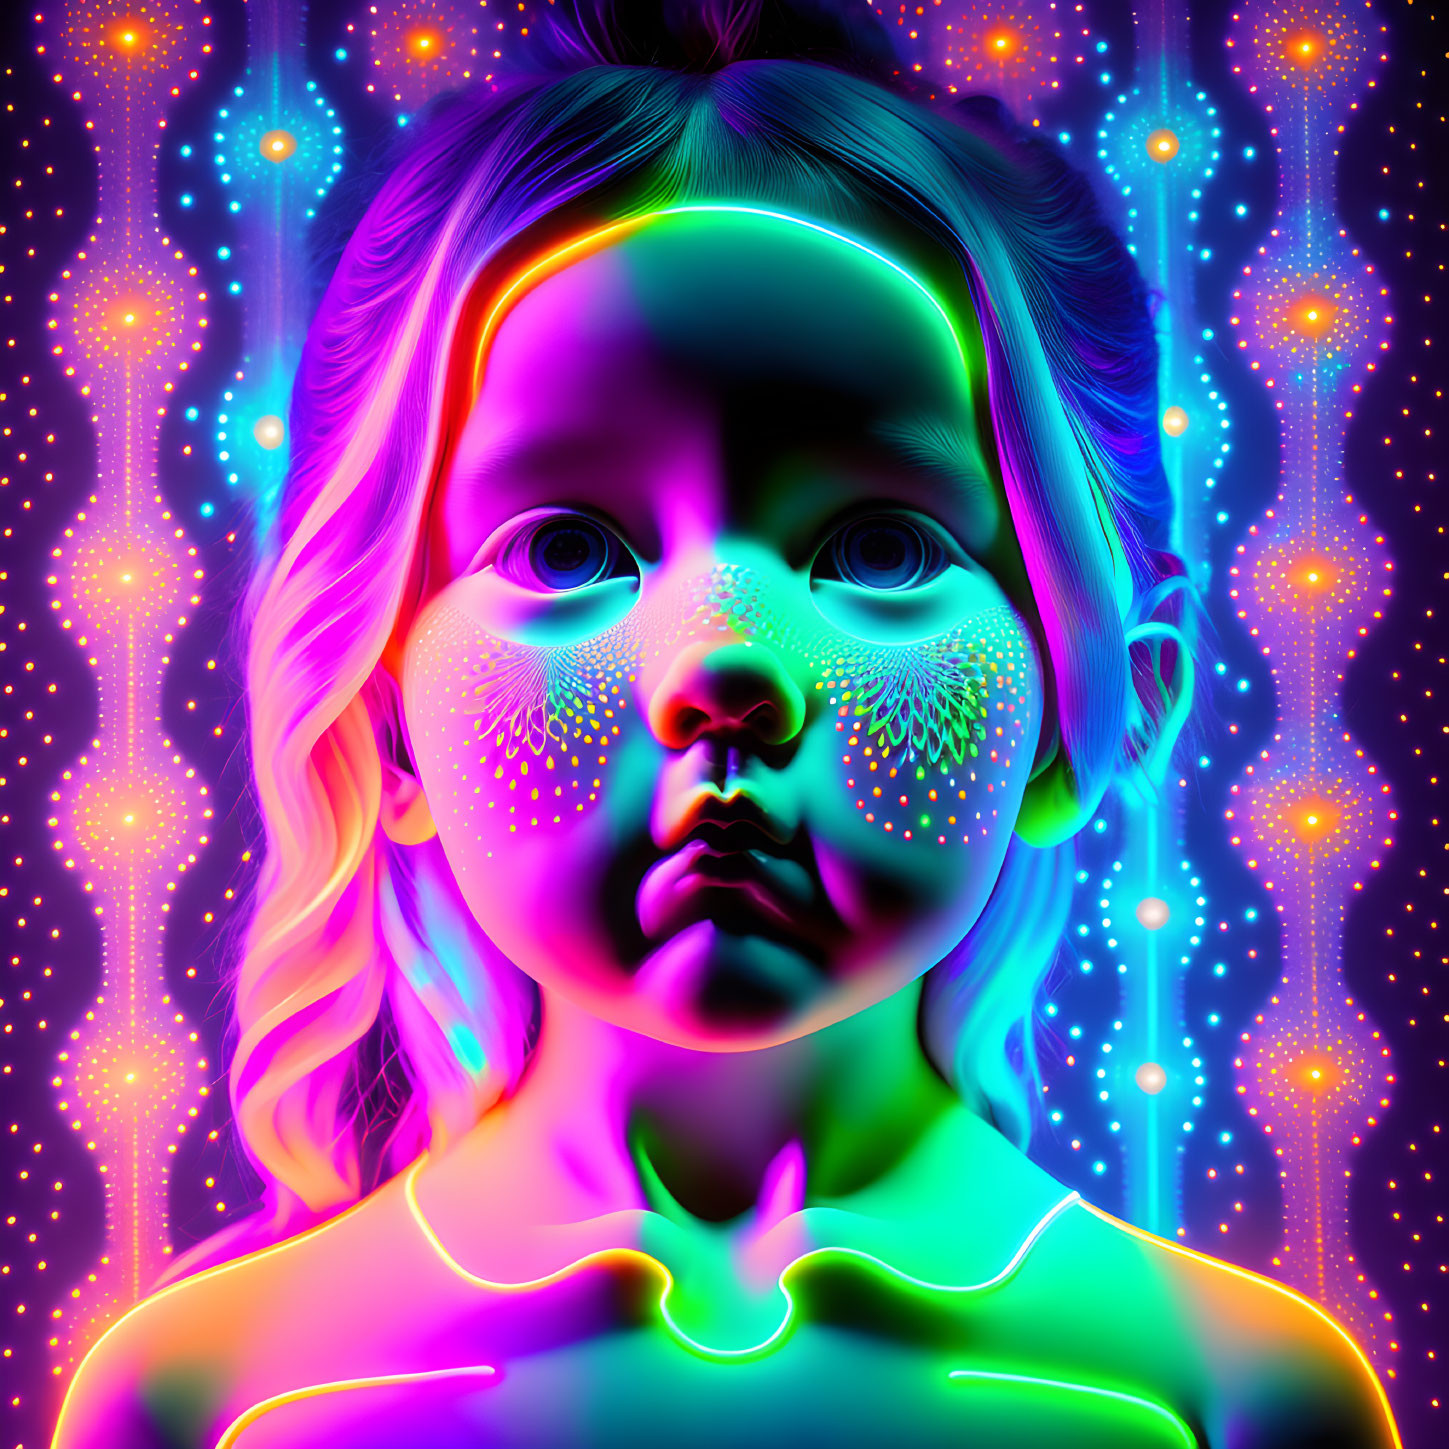 Colorful Child Portrait with Neon Glows and Abstract Patterns